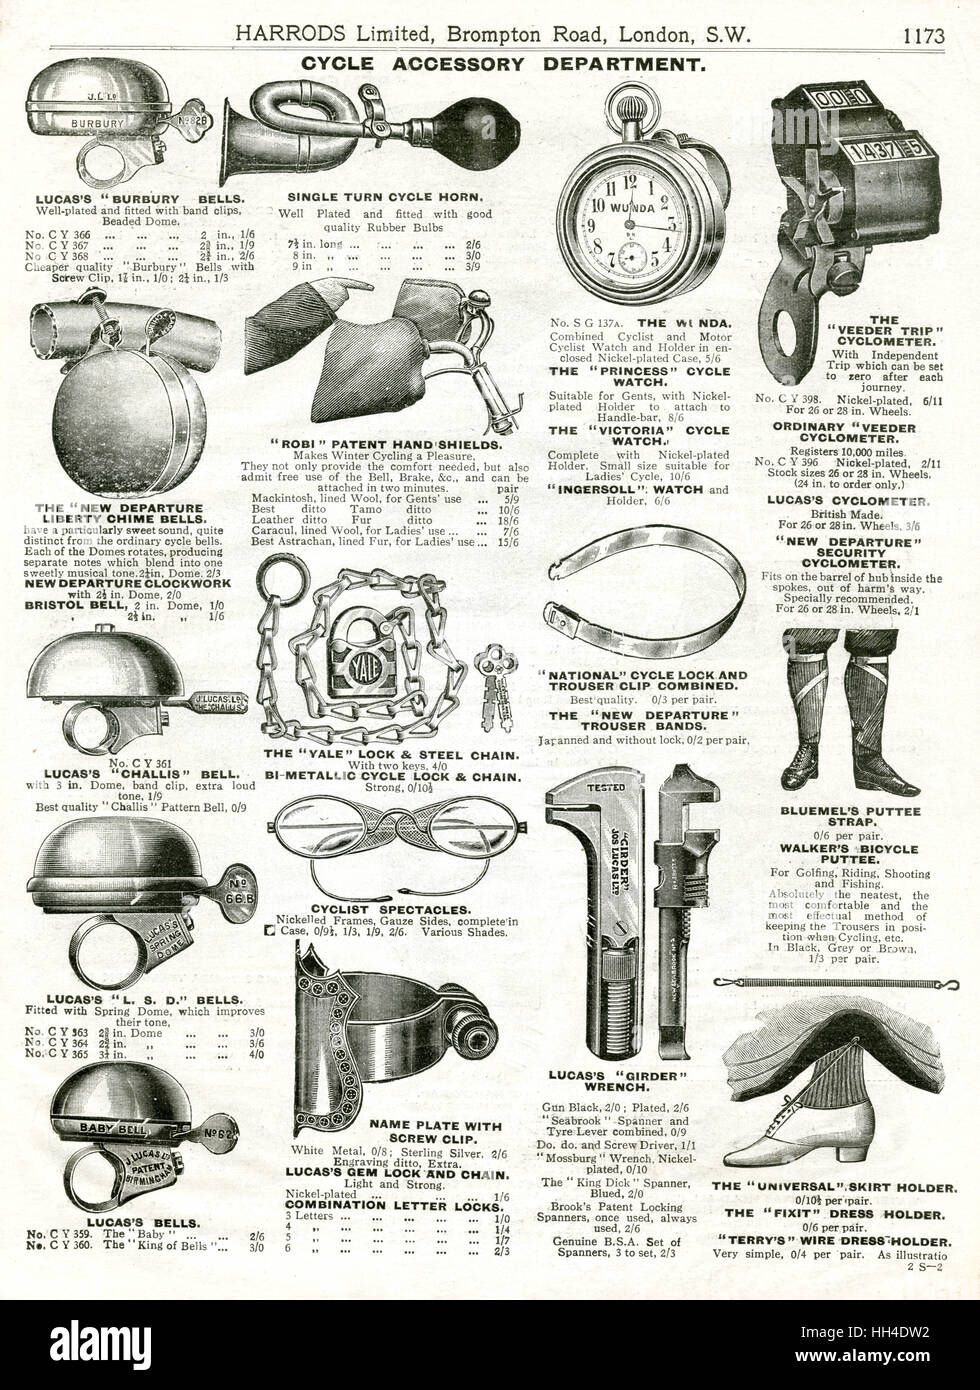 Trade catalogue of cycle accessories 1911 Stock Photo